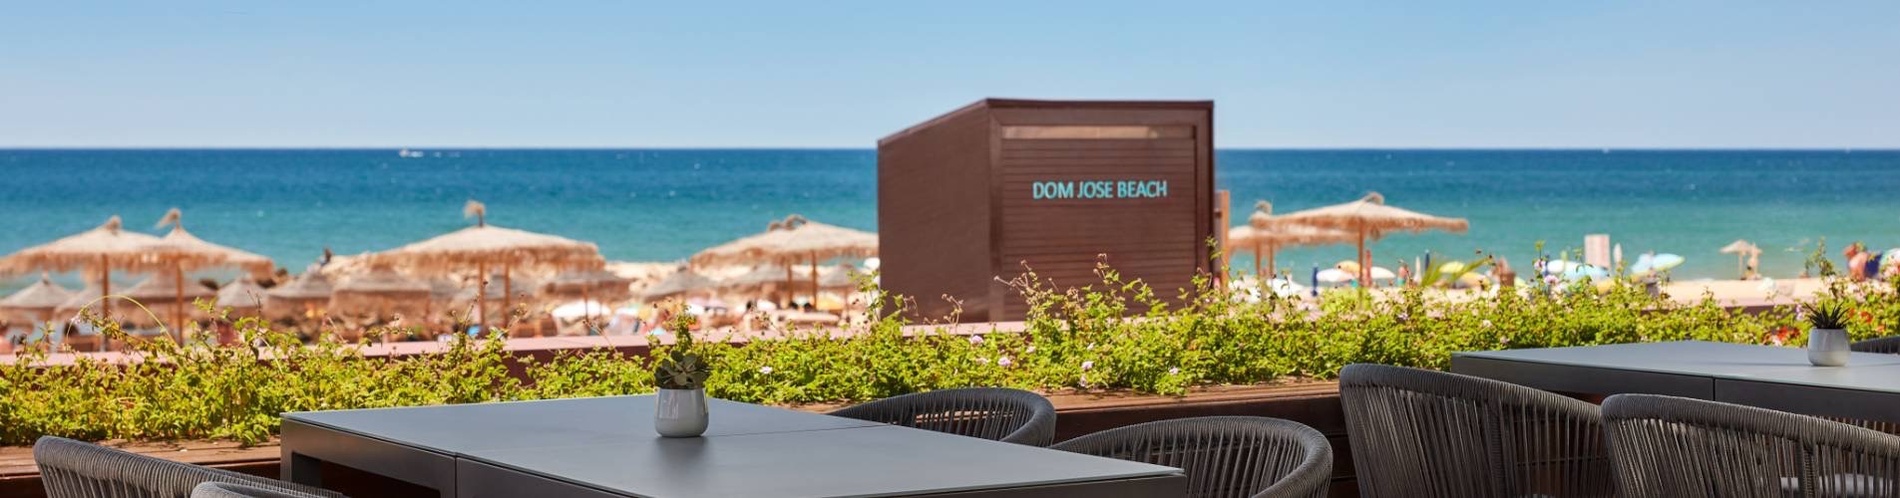 tables and chairs in front of a kiosk that says dom jose beach